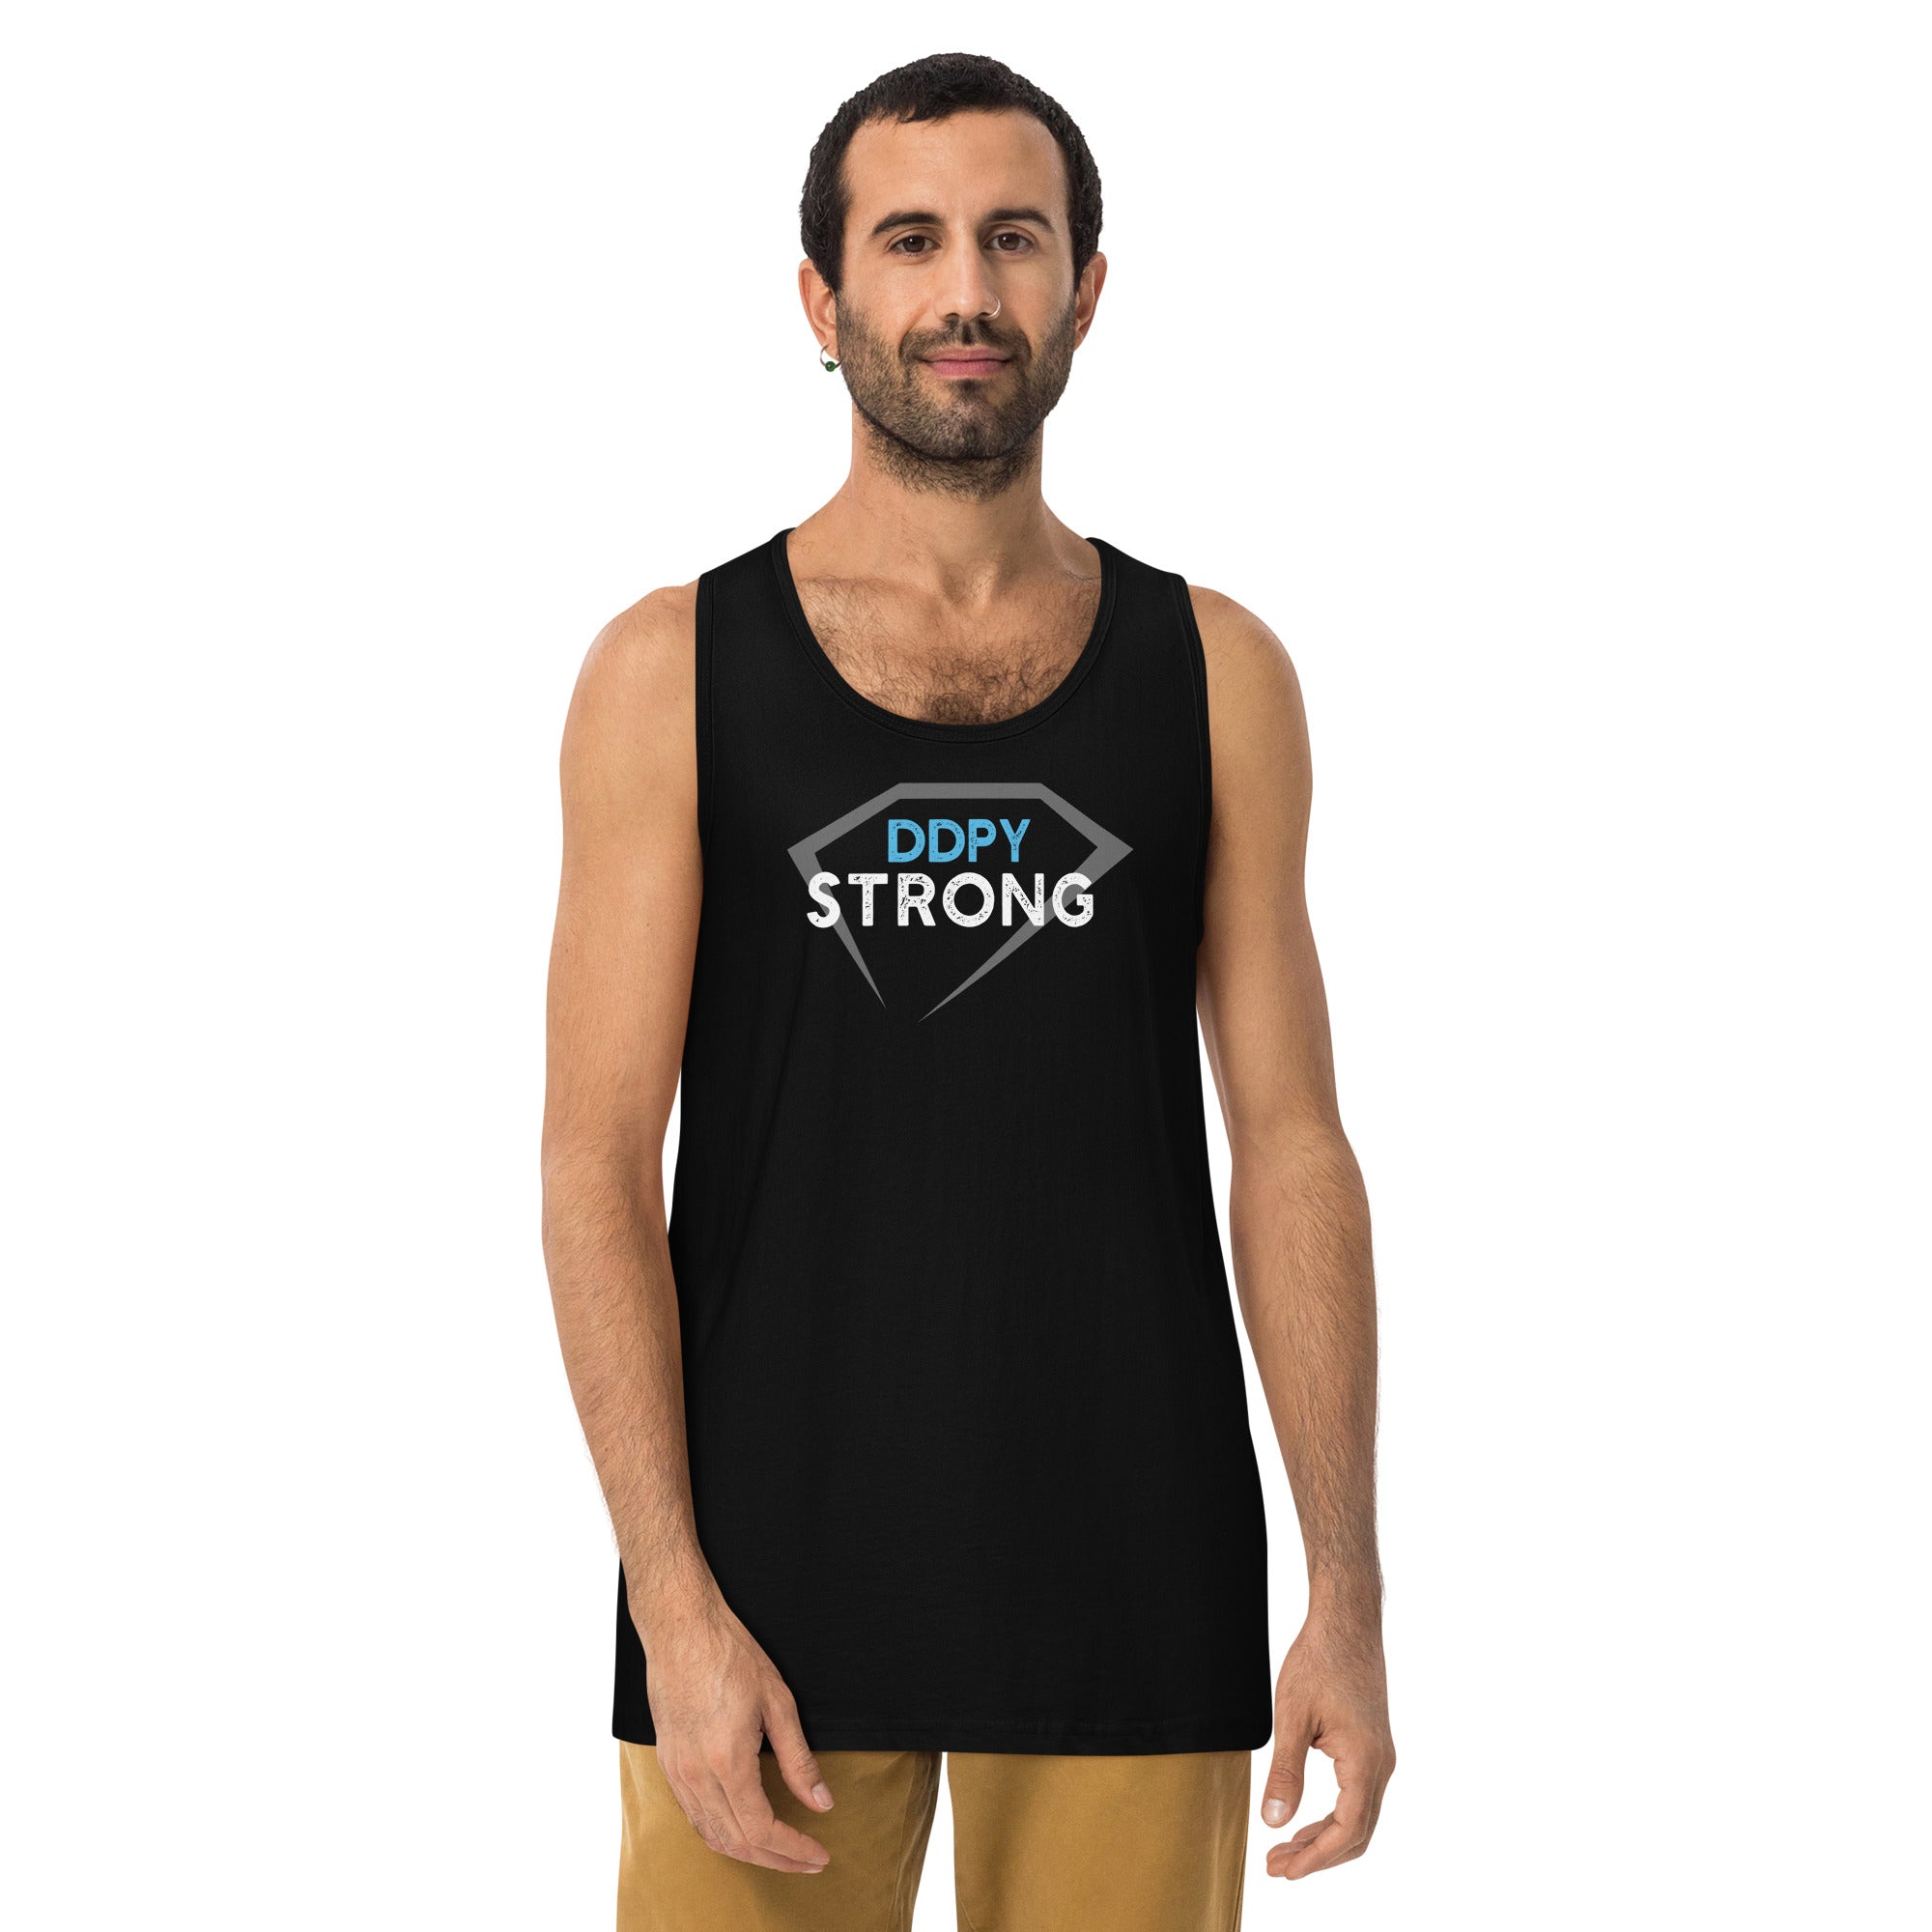 DDPY Strong Men’s premium tank top (On Demand Printing)